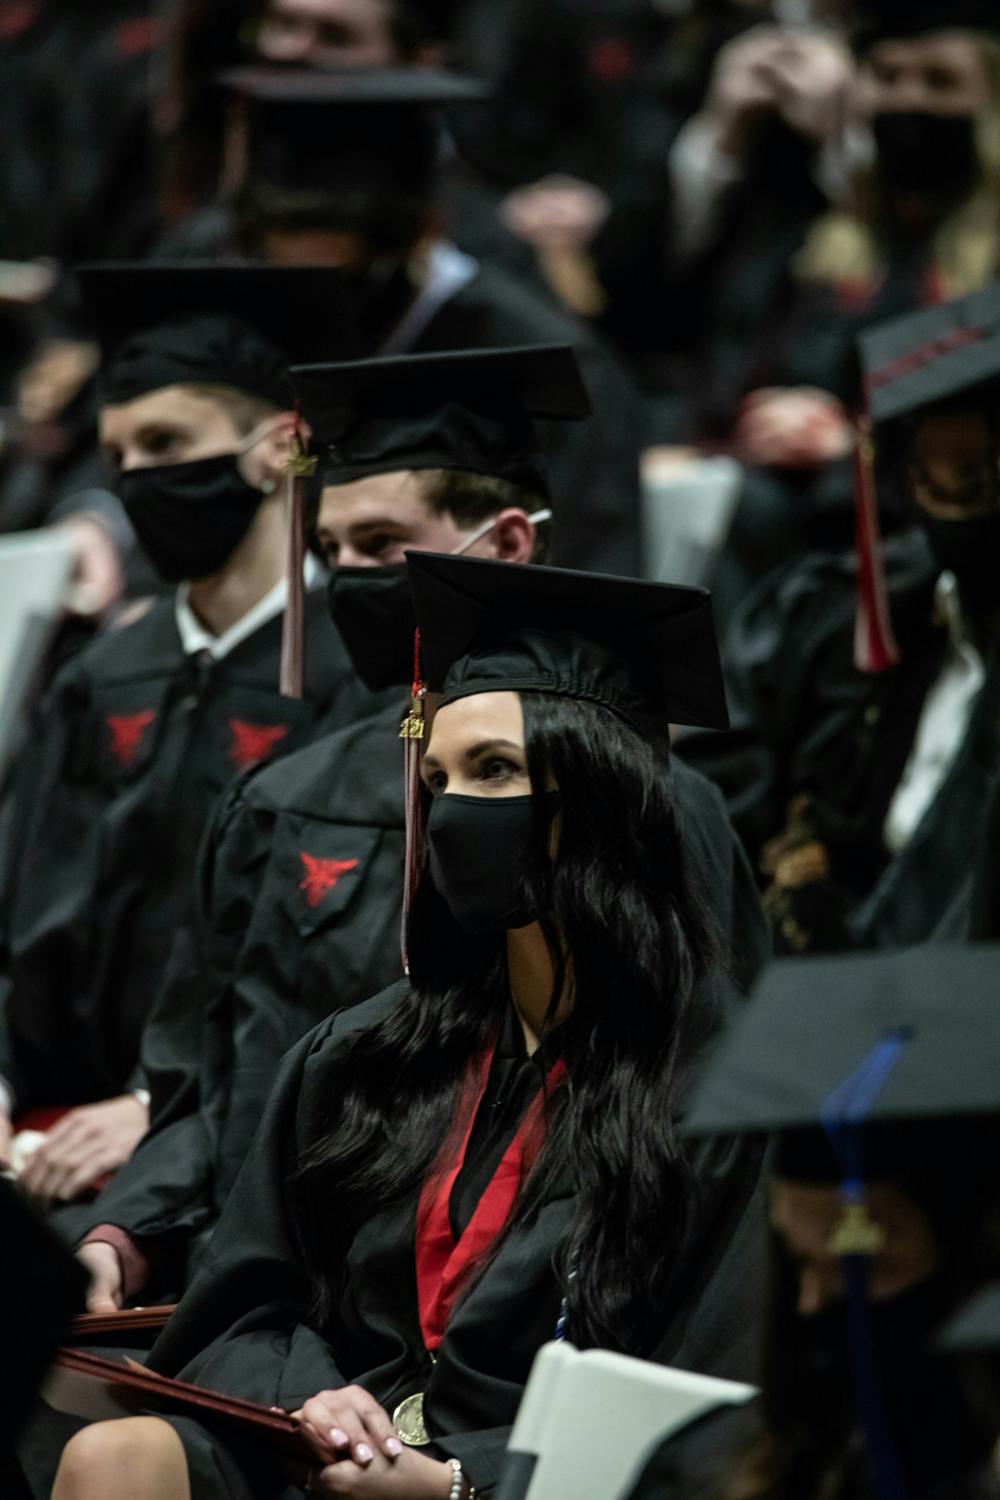 Associated Press: Here's how to prepare to start paying back your student loans when the pandemic payment freeze ends